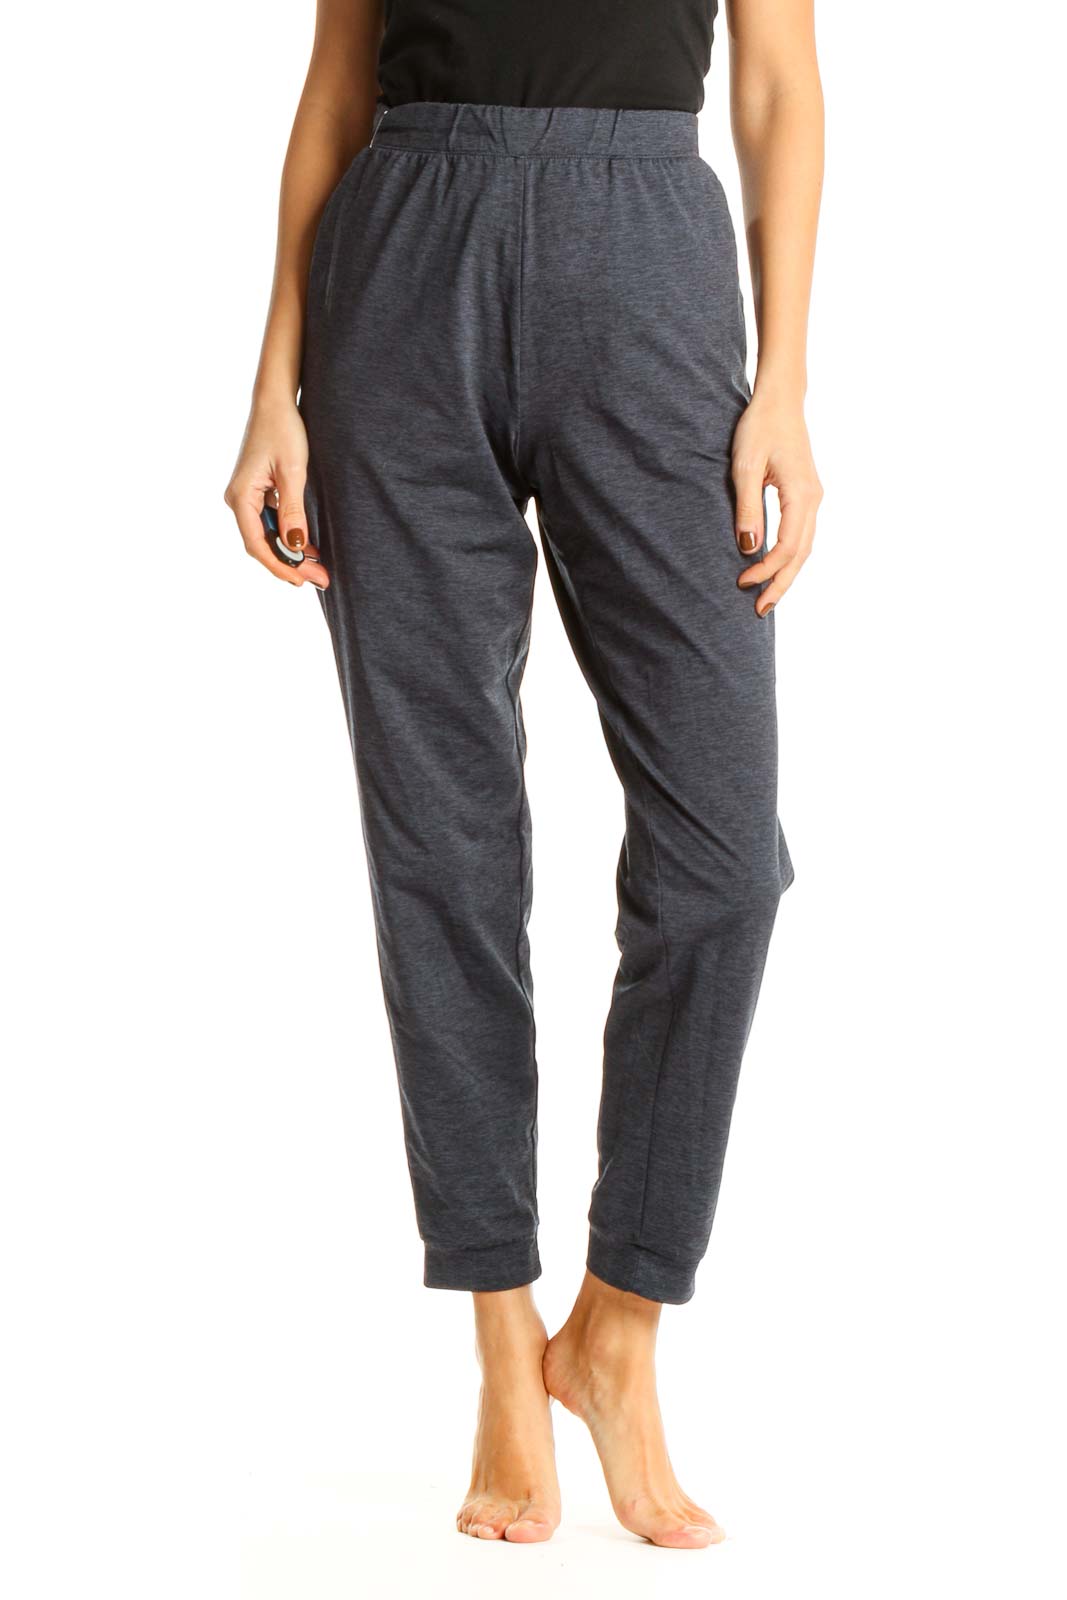 Blue Textured Casual Sweatpants Front